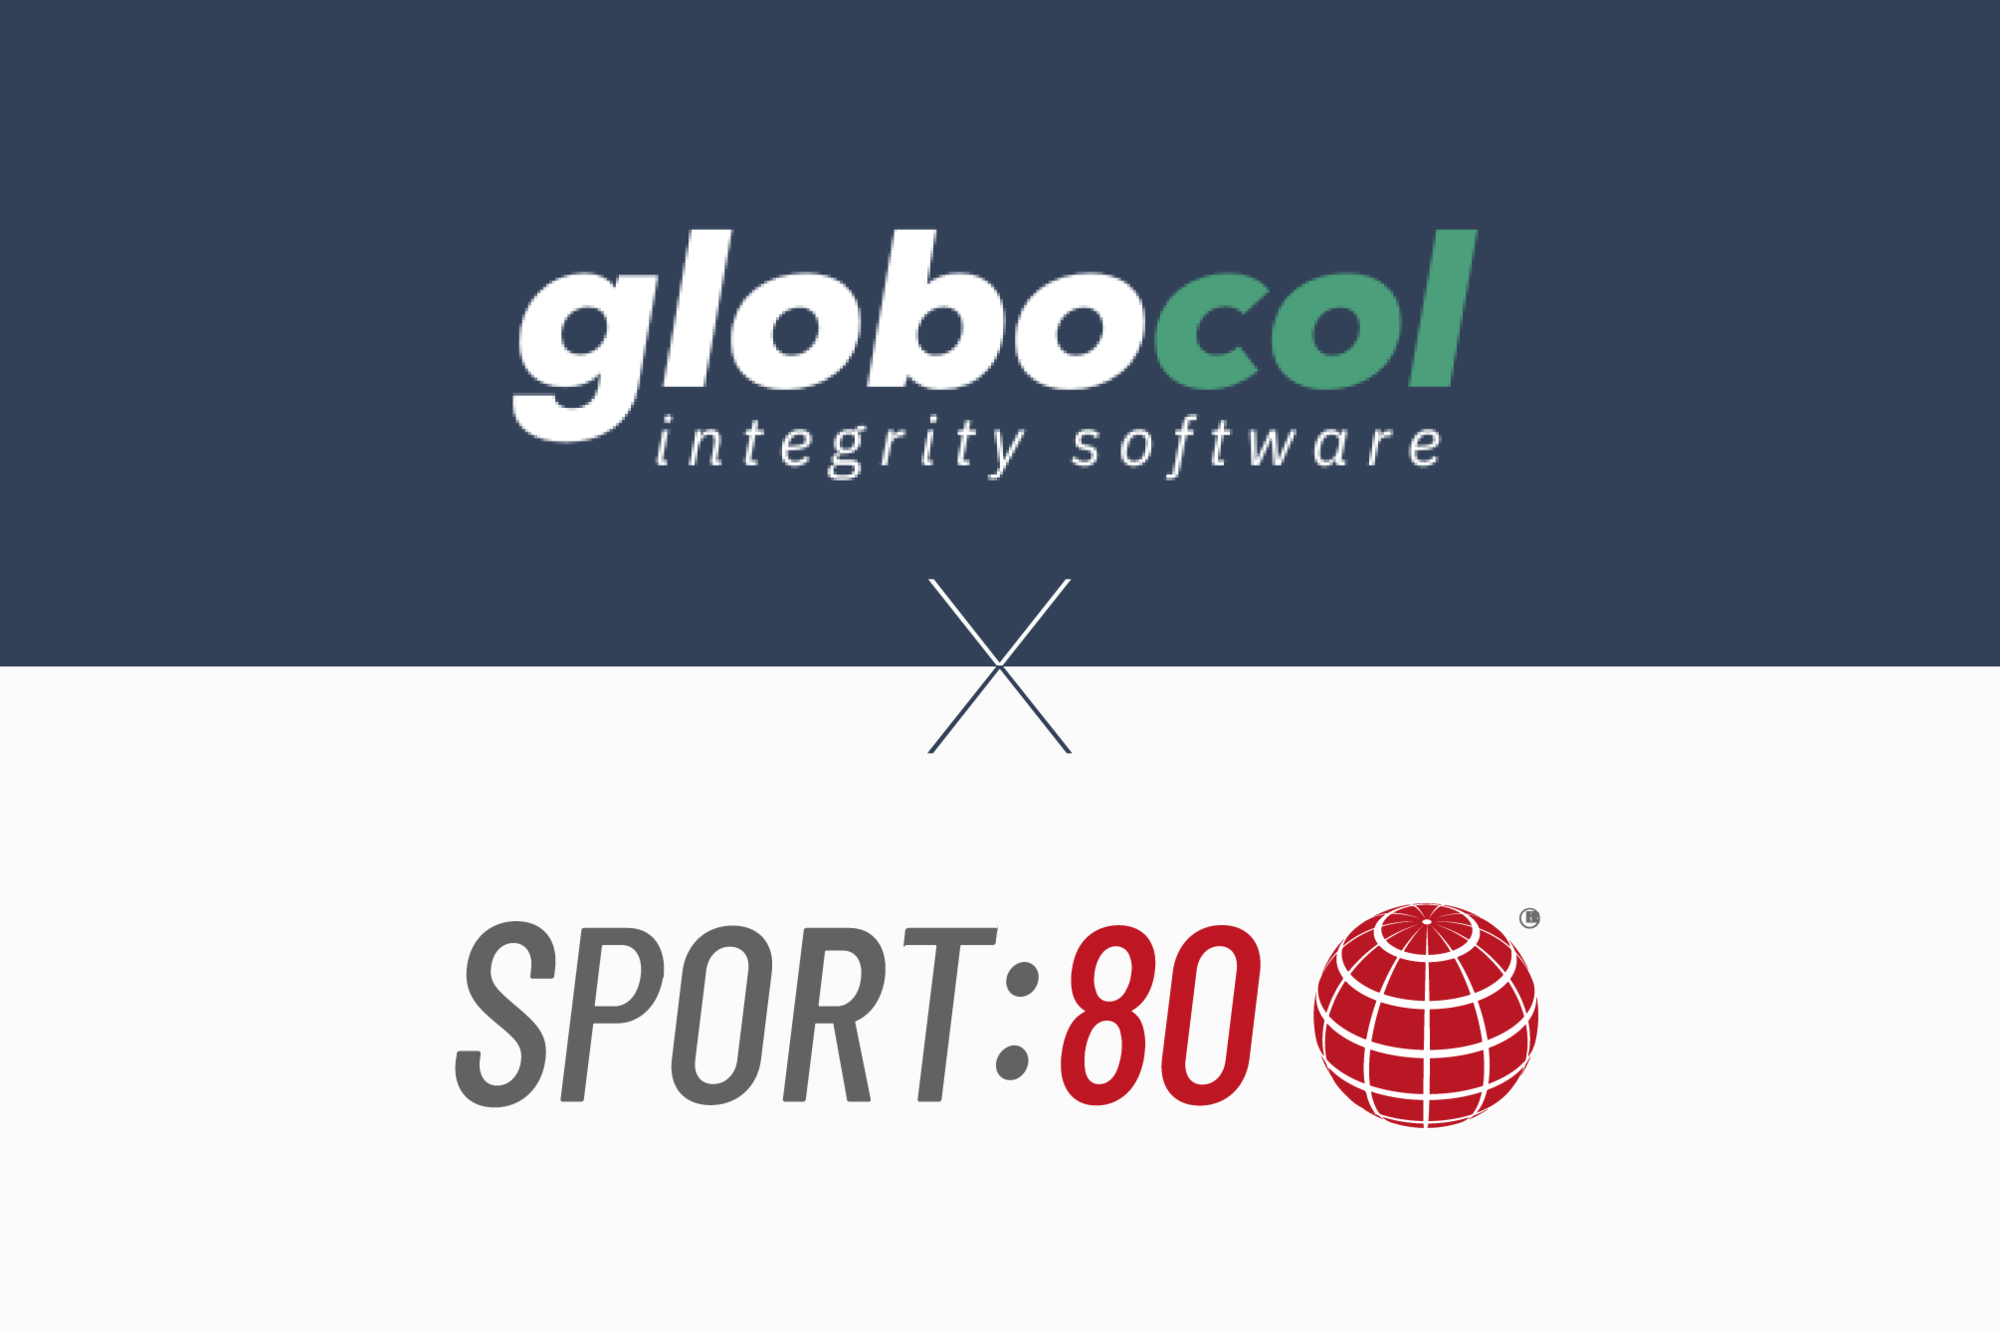 Sport:80 and Globocol partner to simplify safeguarding case management for NGBs